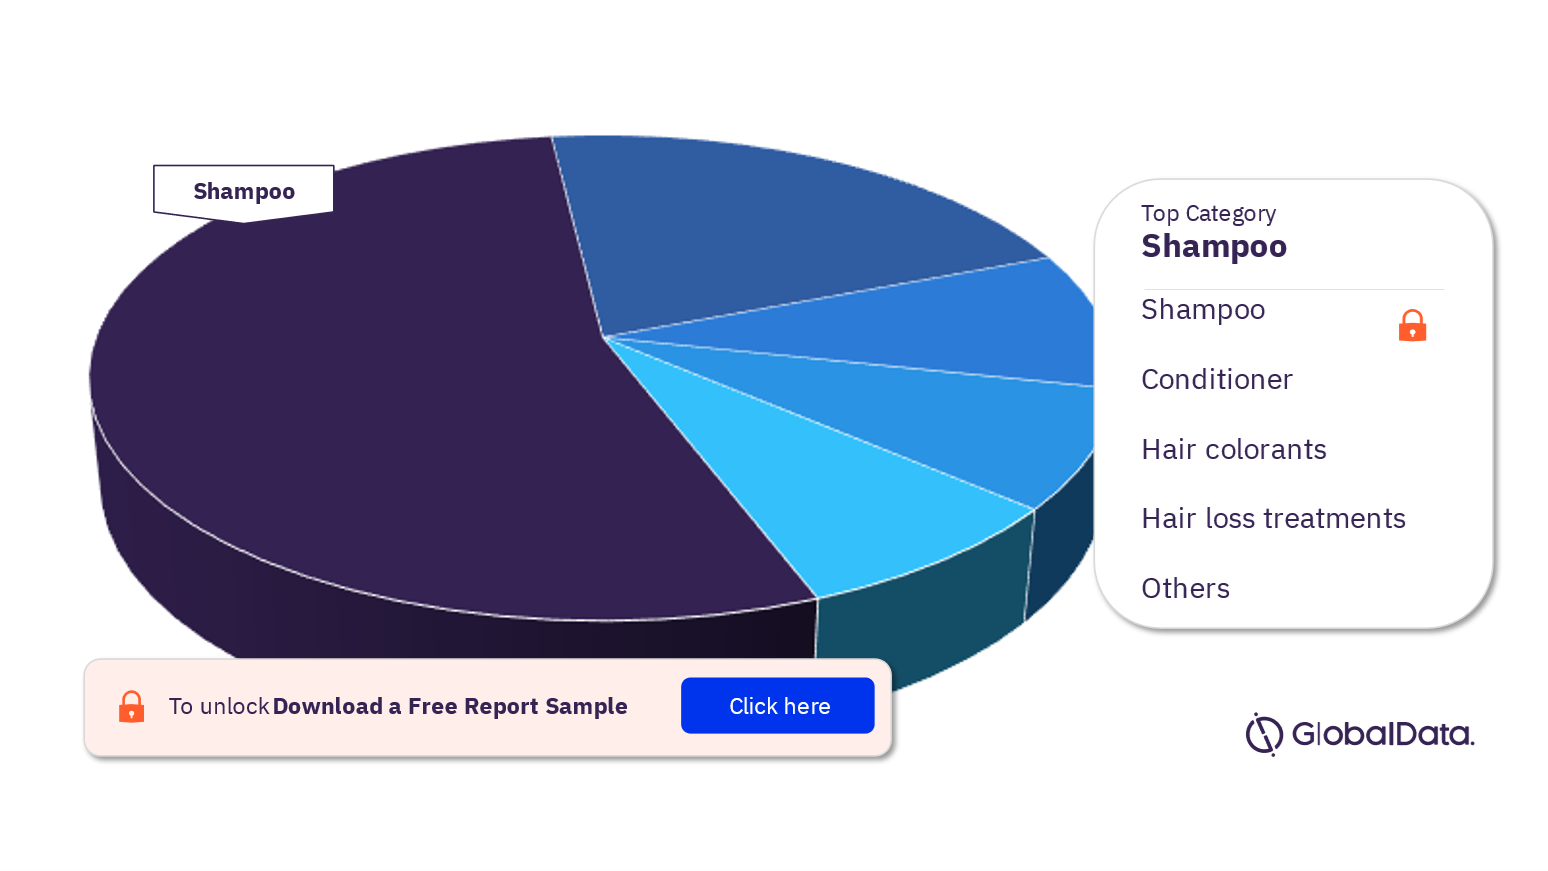 Italy Haircare Market Analysis, by Categories, 2021 (%)